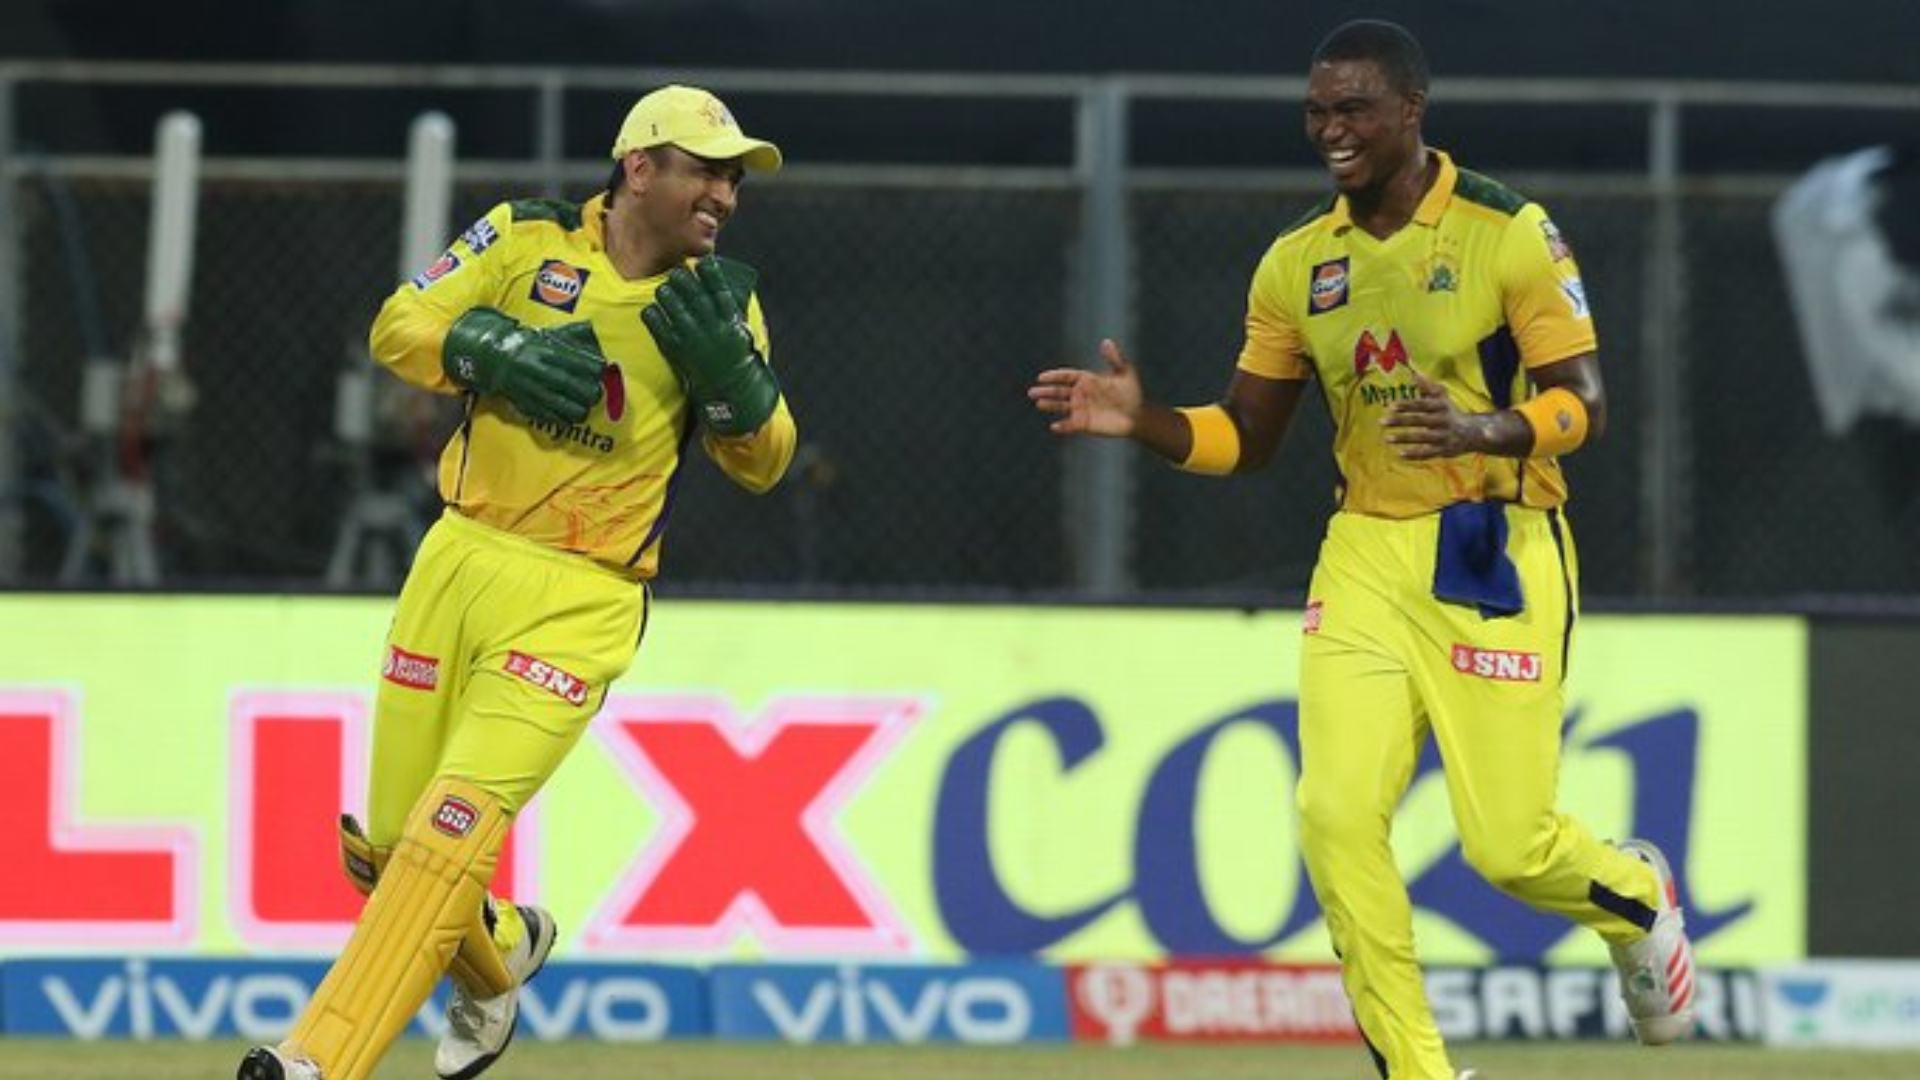 MS Dhoni finally hit a boundary off Sunil Narine and it took him 65 balls to break the hoodoo.